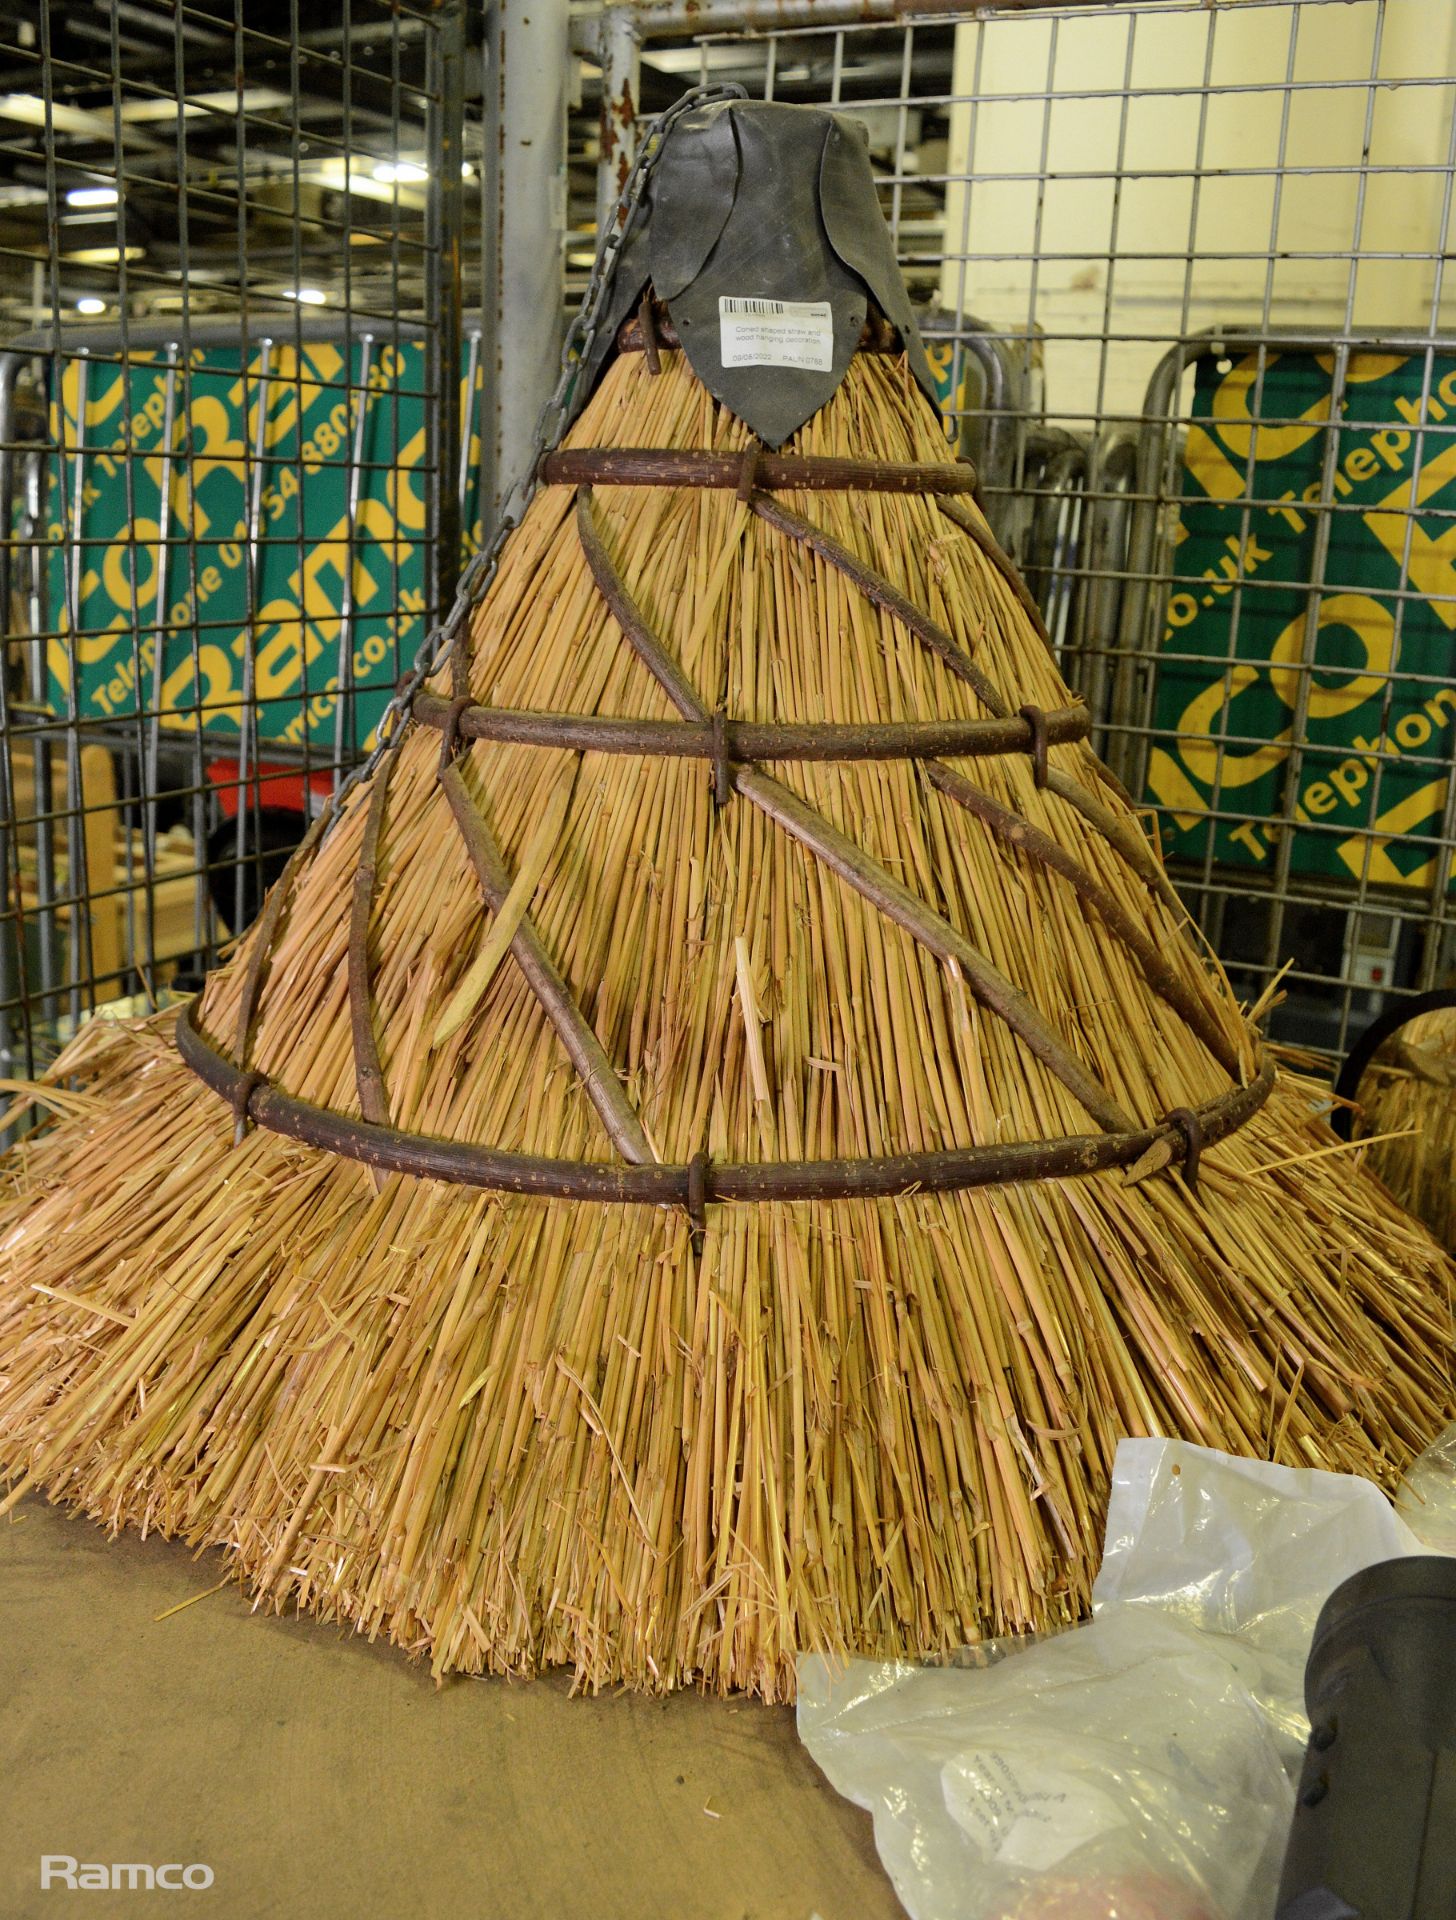 Coned shaped straw and wood hanging decoration, Domestic equipment - tags, mirrors, velcro - Image 2 of 9